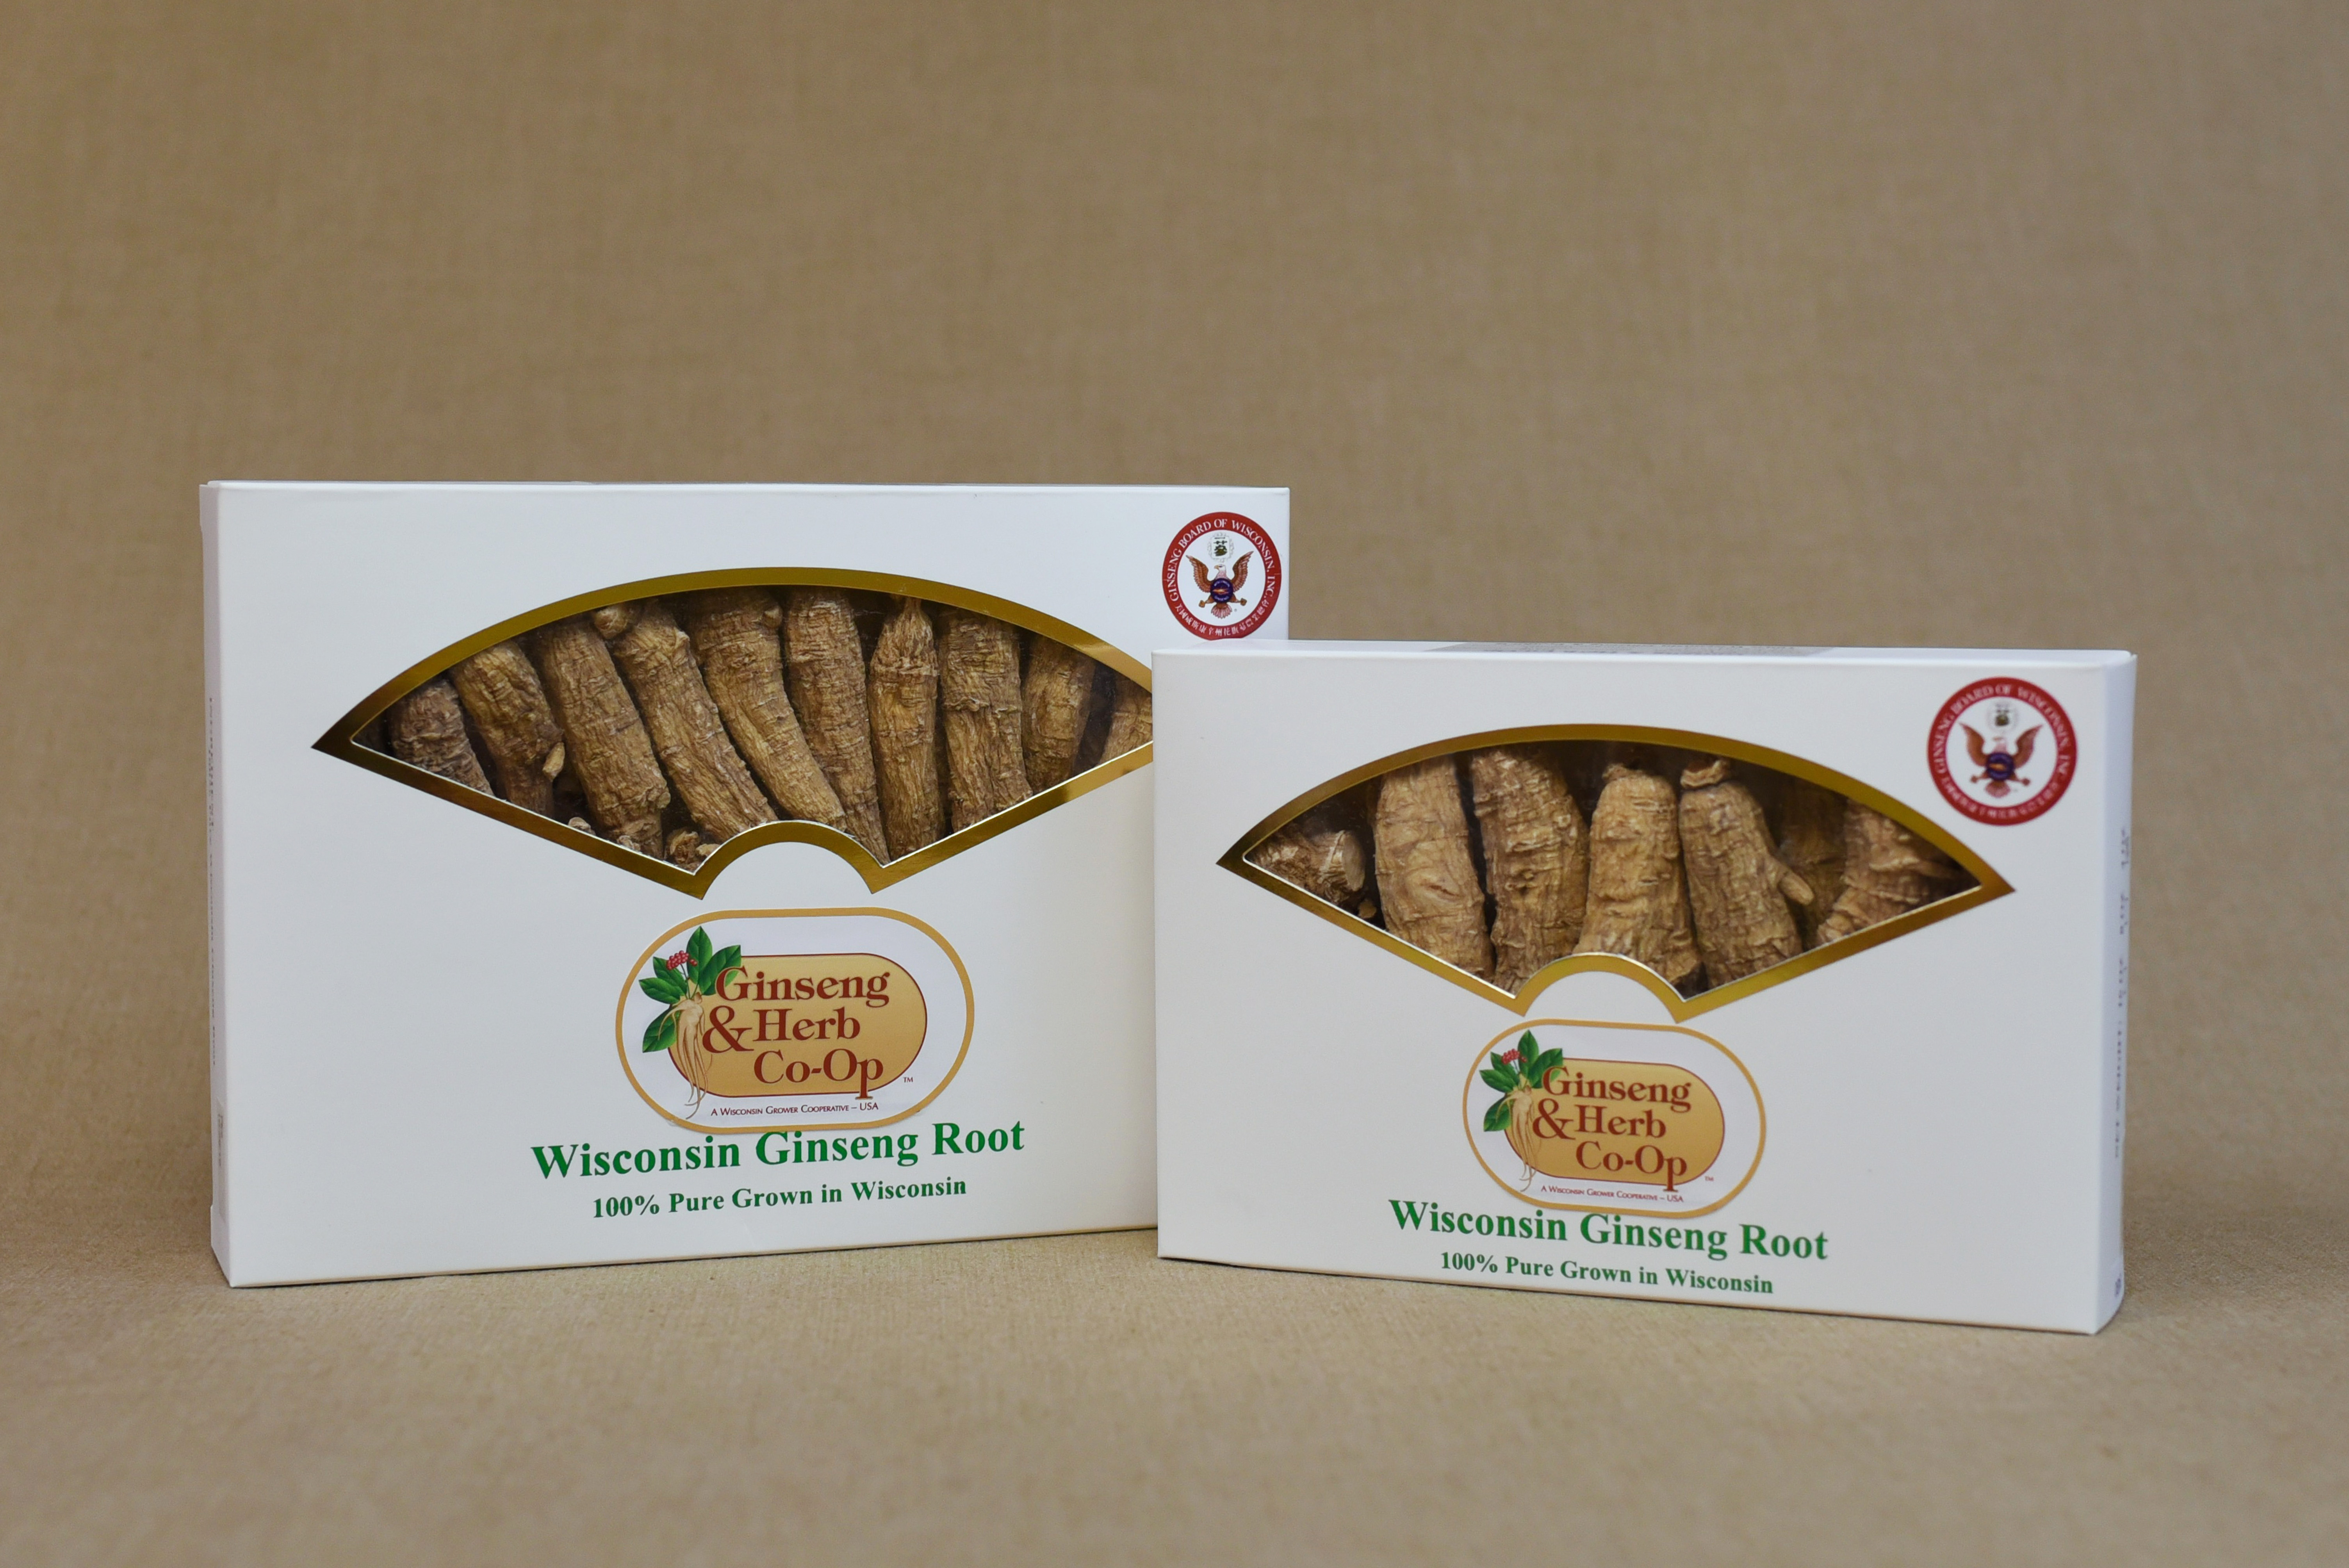 Buy Now! Get high quality Wisconsin Ginseng roots